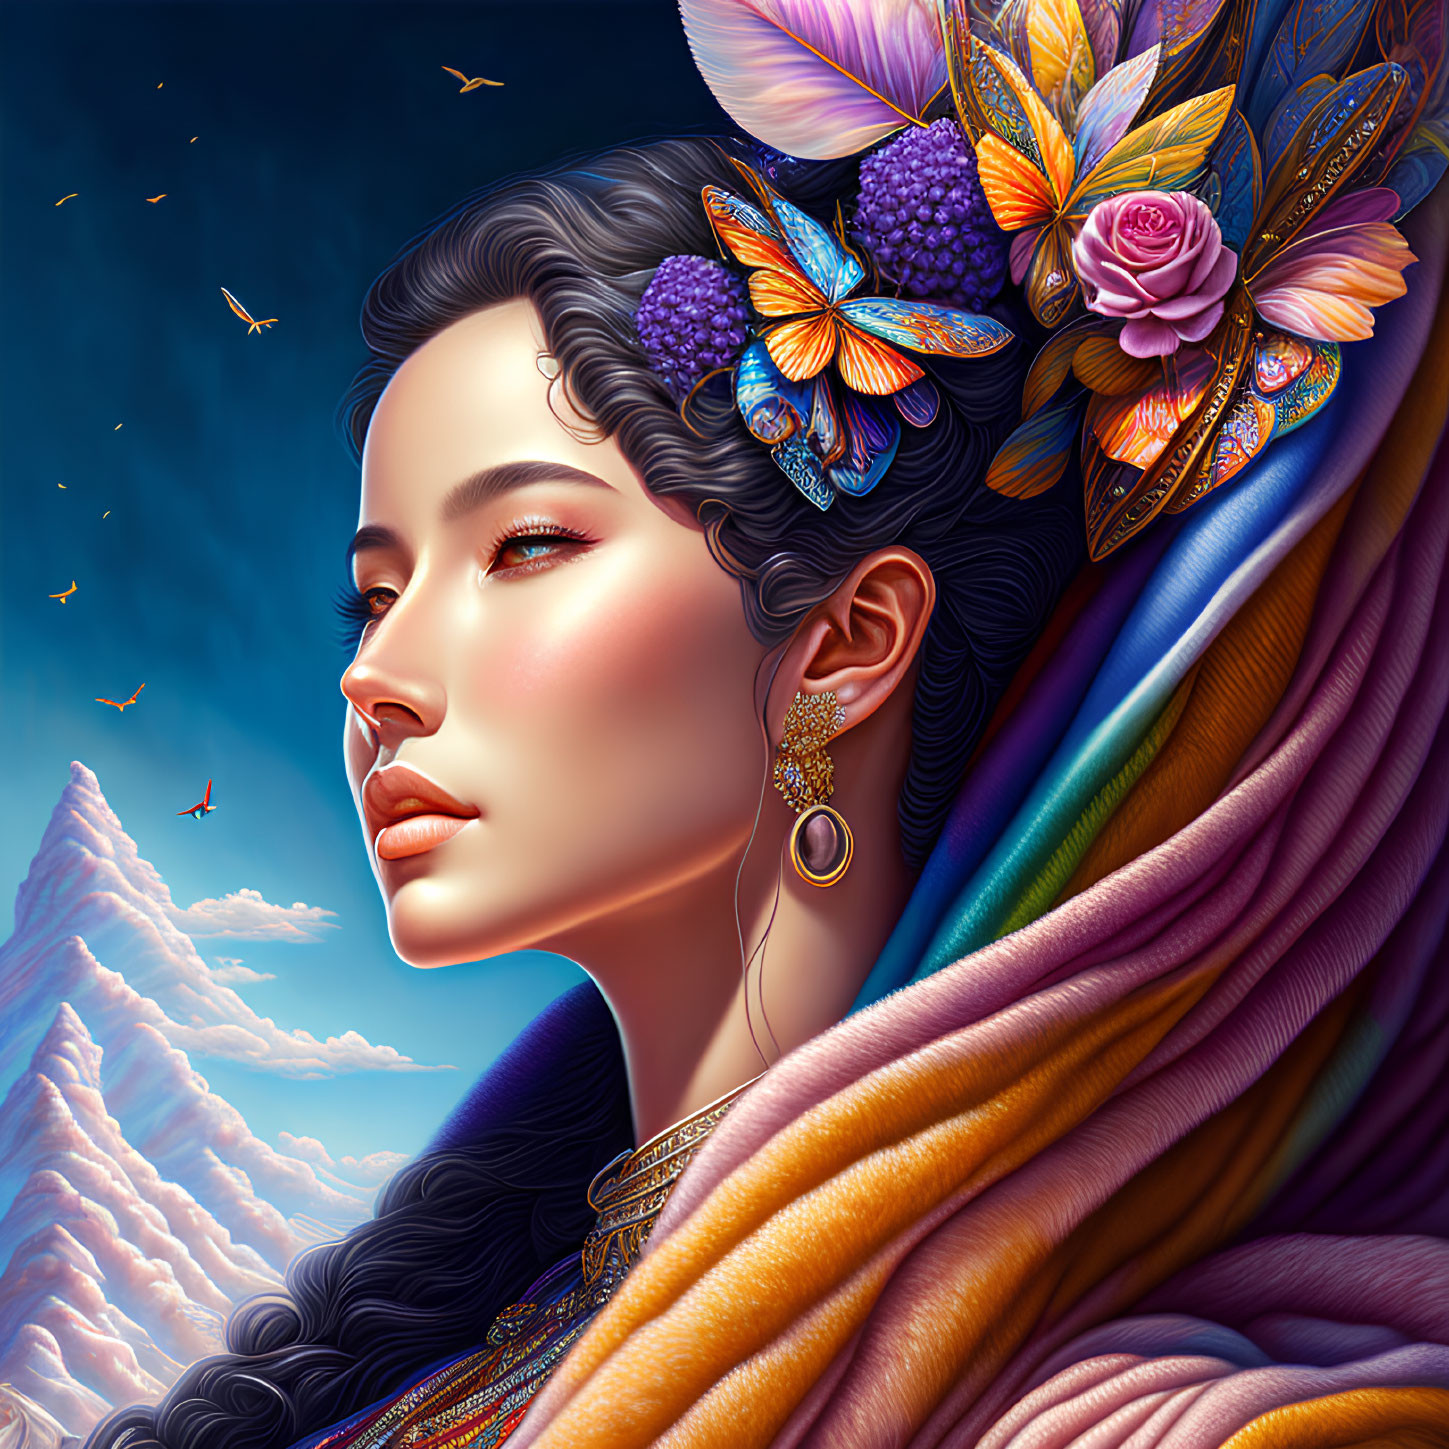 Colorful Digital Artwork of Woman with Floral Hair Adornments